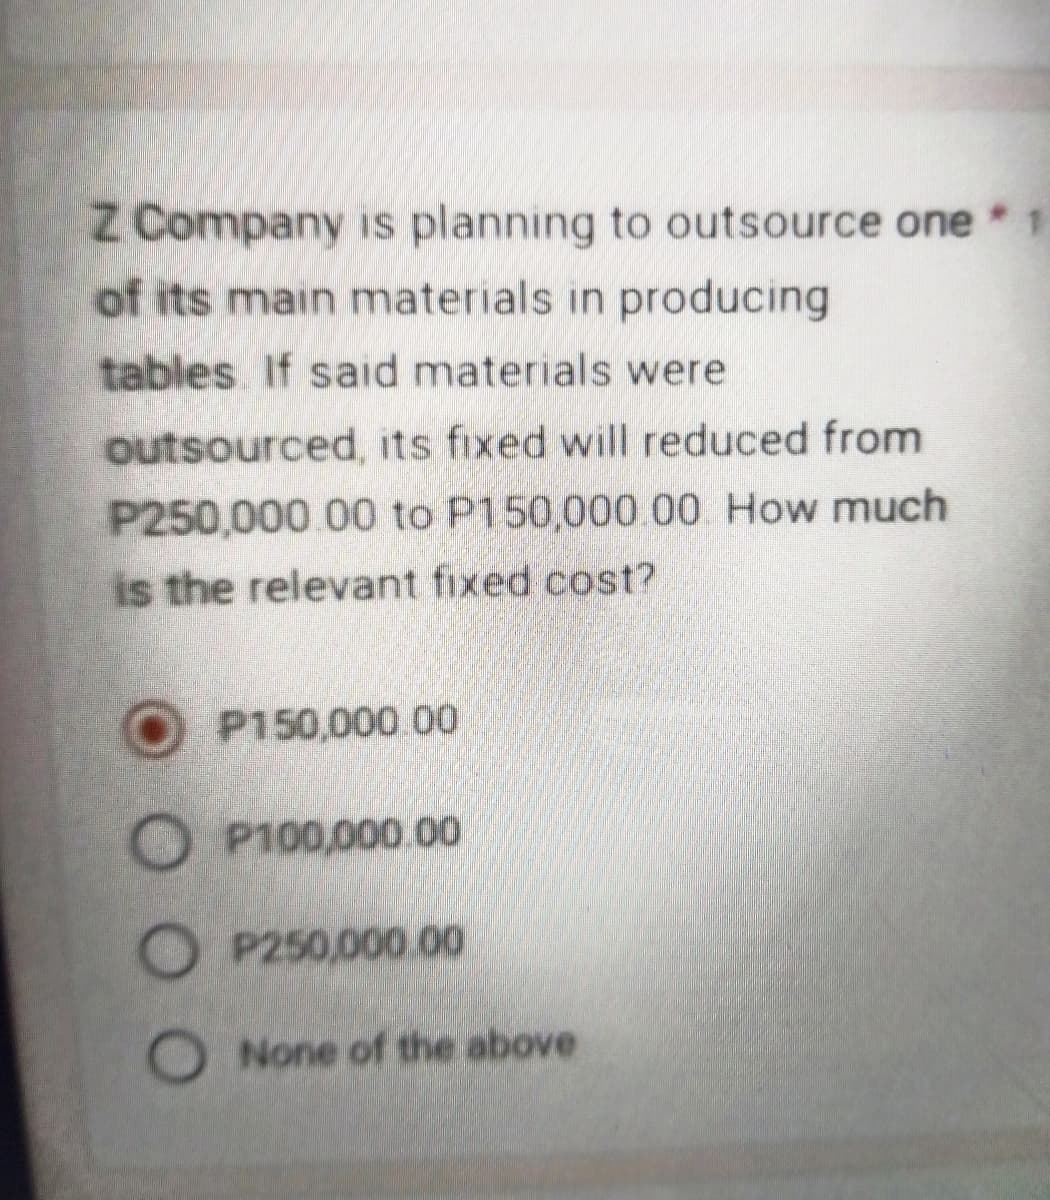 Z Company is planning to outsource one * 1
of its main materials in producing
tables. If said materials were
outsourced, its fixed will reduced from
P250,000.00 to P150,000.00 How much
is the relevant fixed cost?
P150,000.00
OP100,000.00
OP250,000.00
O None of the above